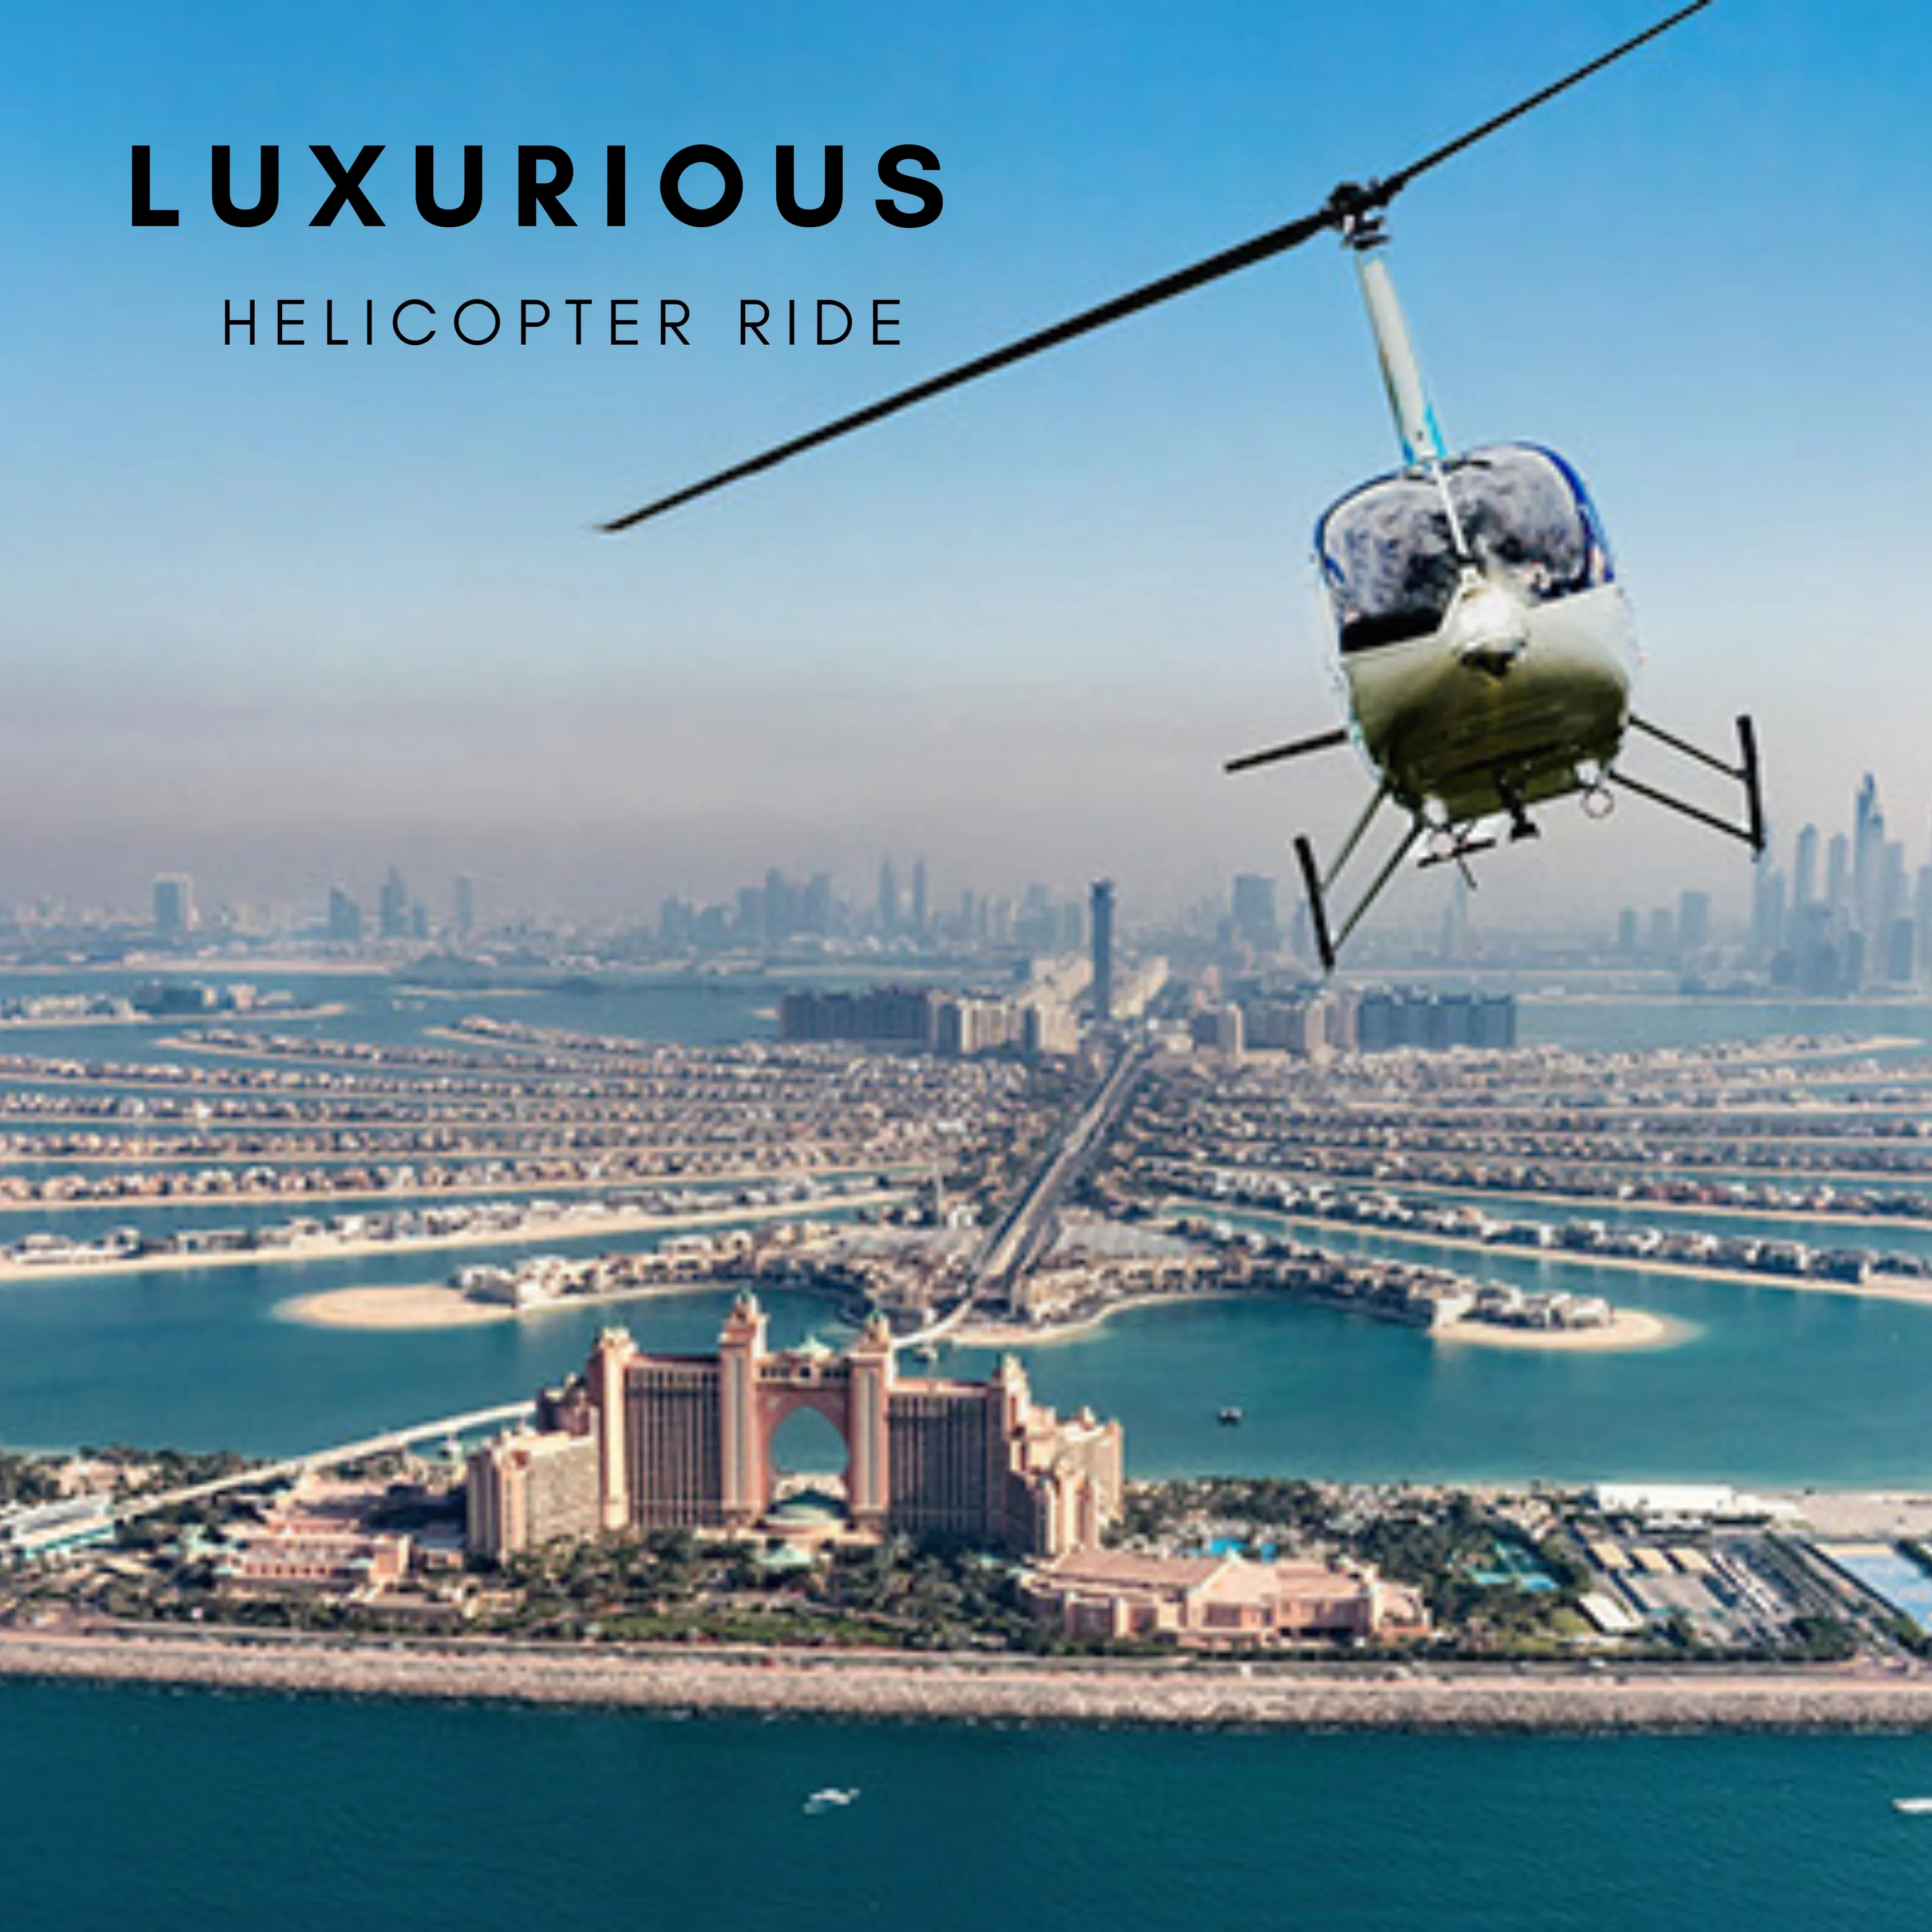 HELICOPTER RIDE IN DUBAI